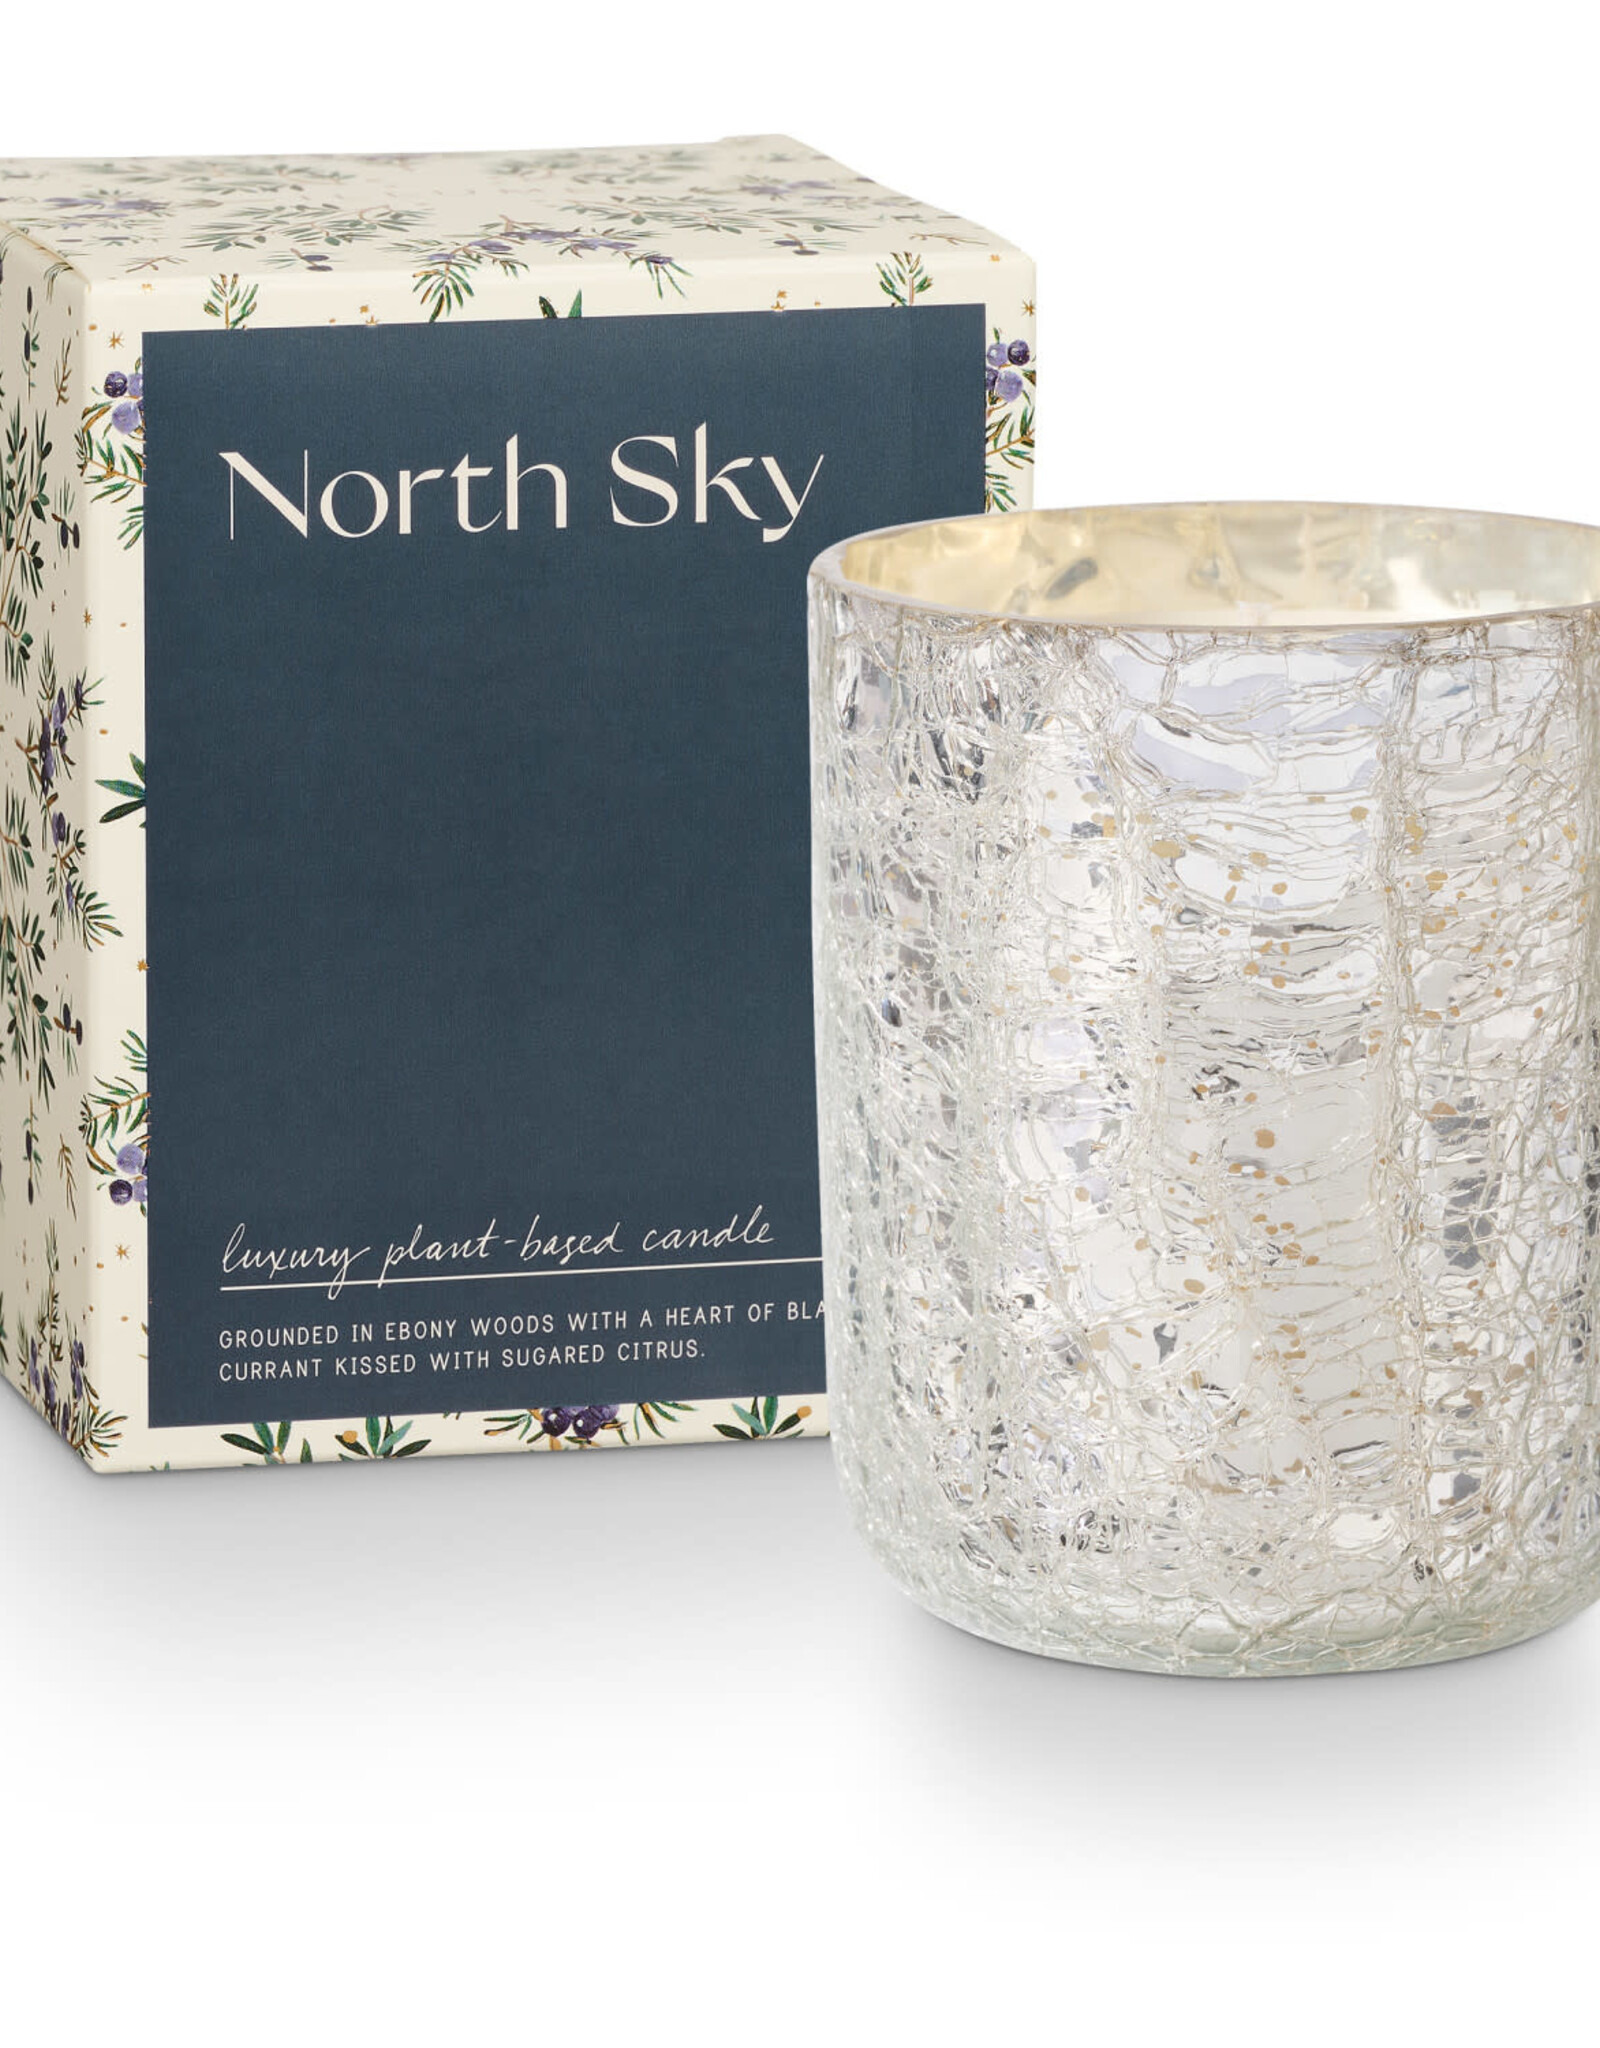 Illume North Sky Small Boxed Crackle Glass Candle